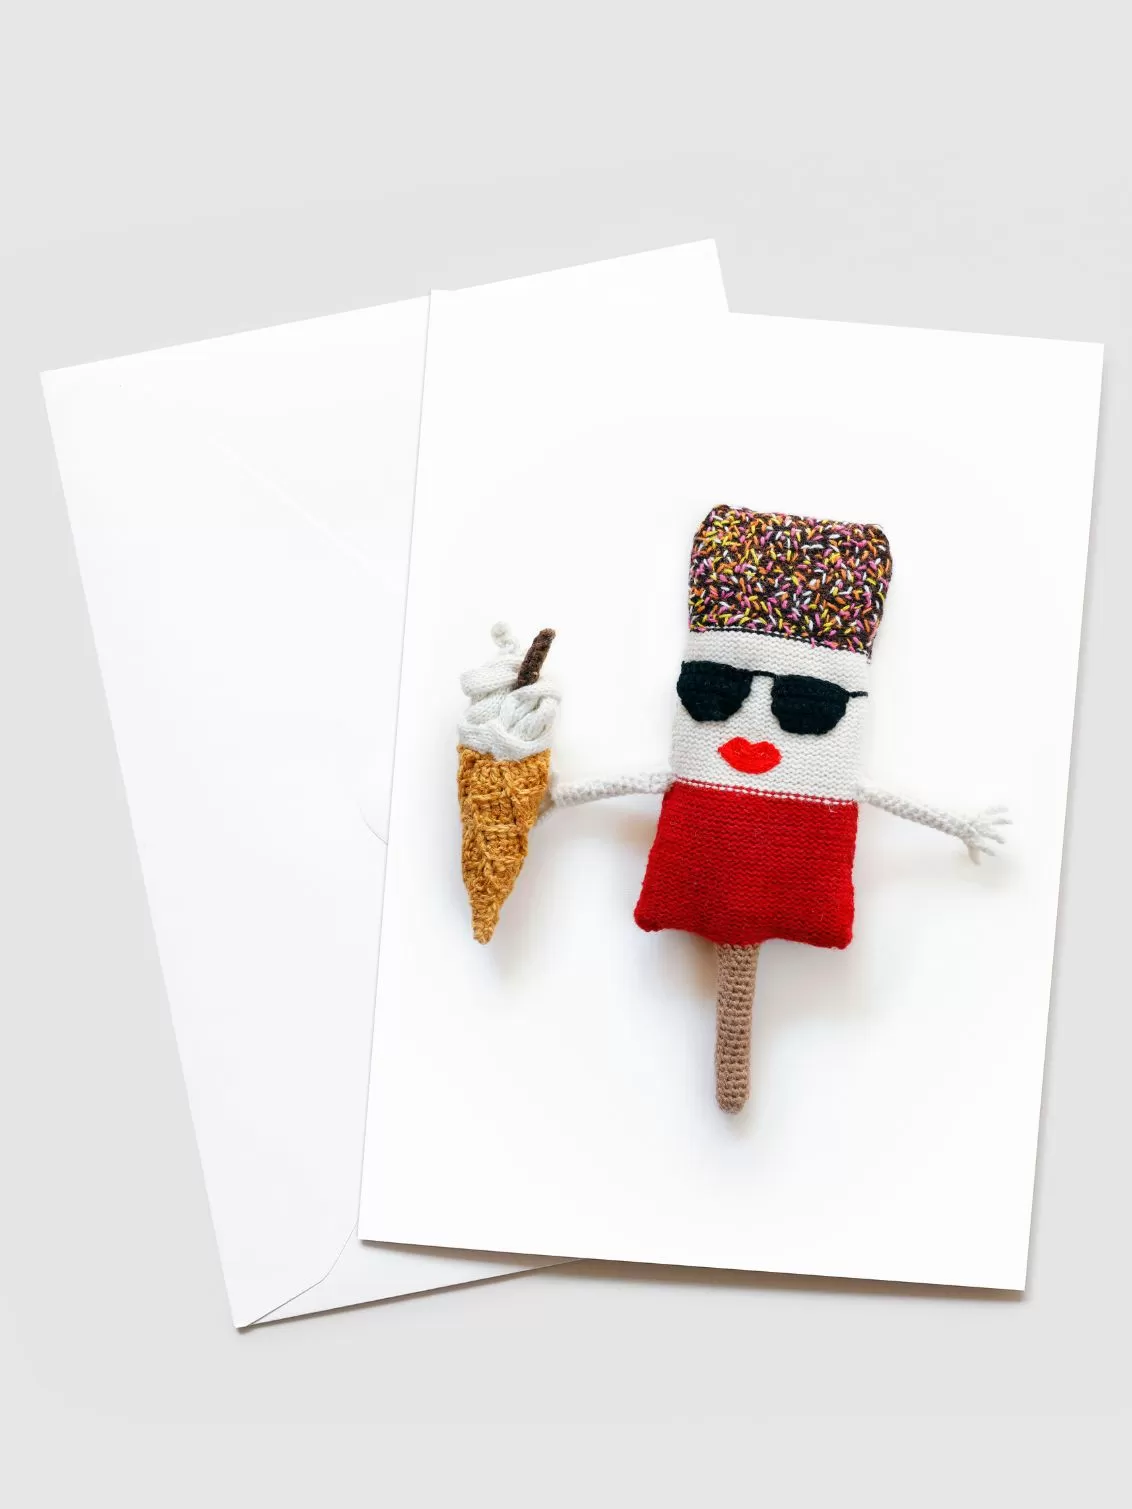 Kate Jenkins 'Ab Fab' Blank Greetings Card seen with a white envelope behind. On the front of the card is a crotched Ab Fab with pink lips, wearing sunglasses and holding a 99 Flake.